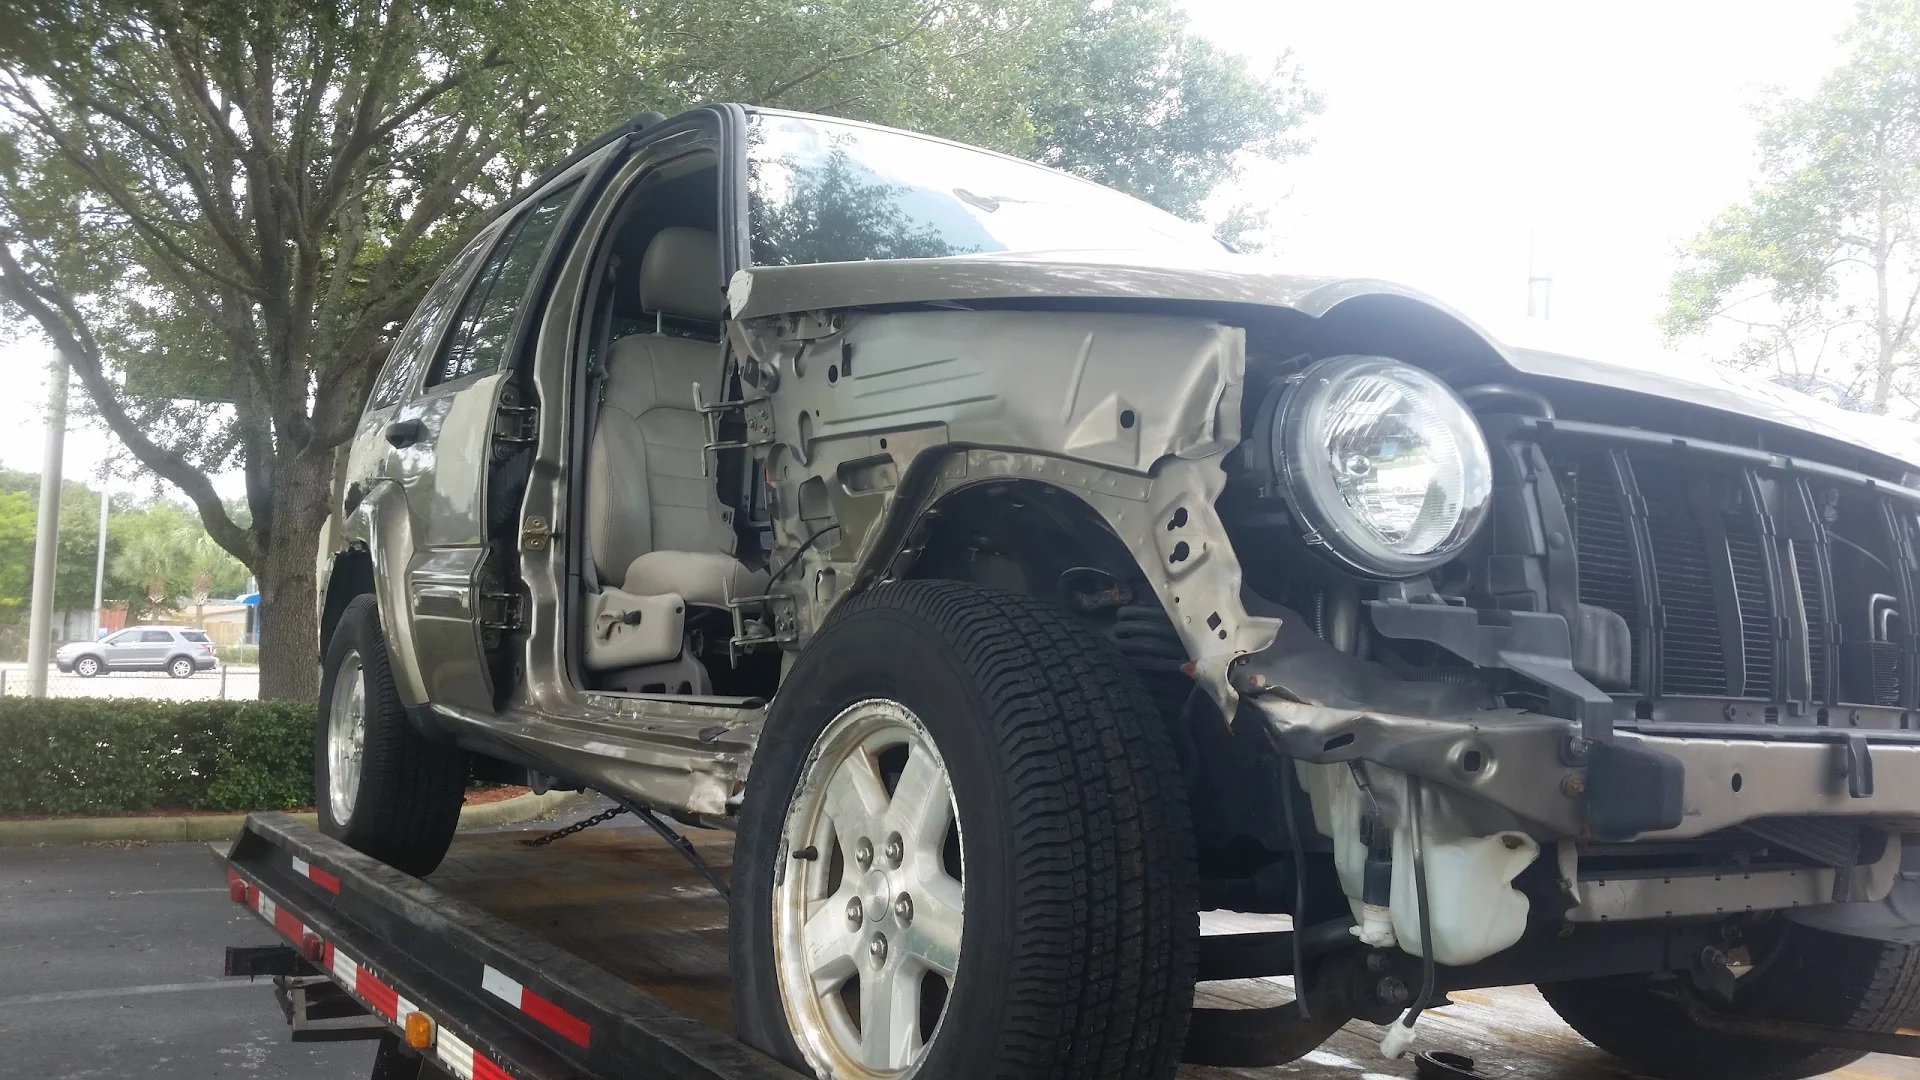 2003 Jeep Liberty, some assembly required Florida Junk Cars Tampa (813)833-9273